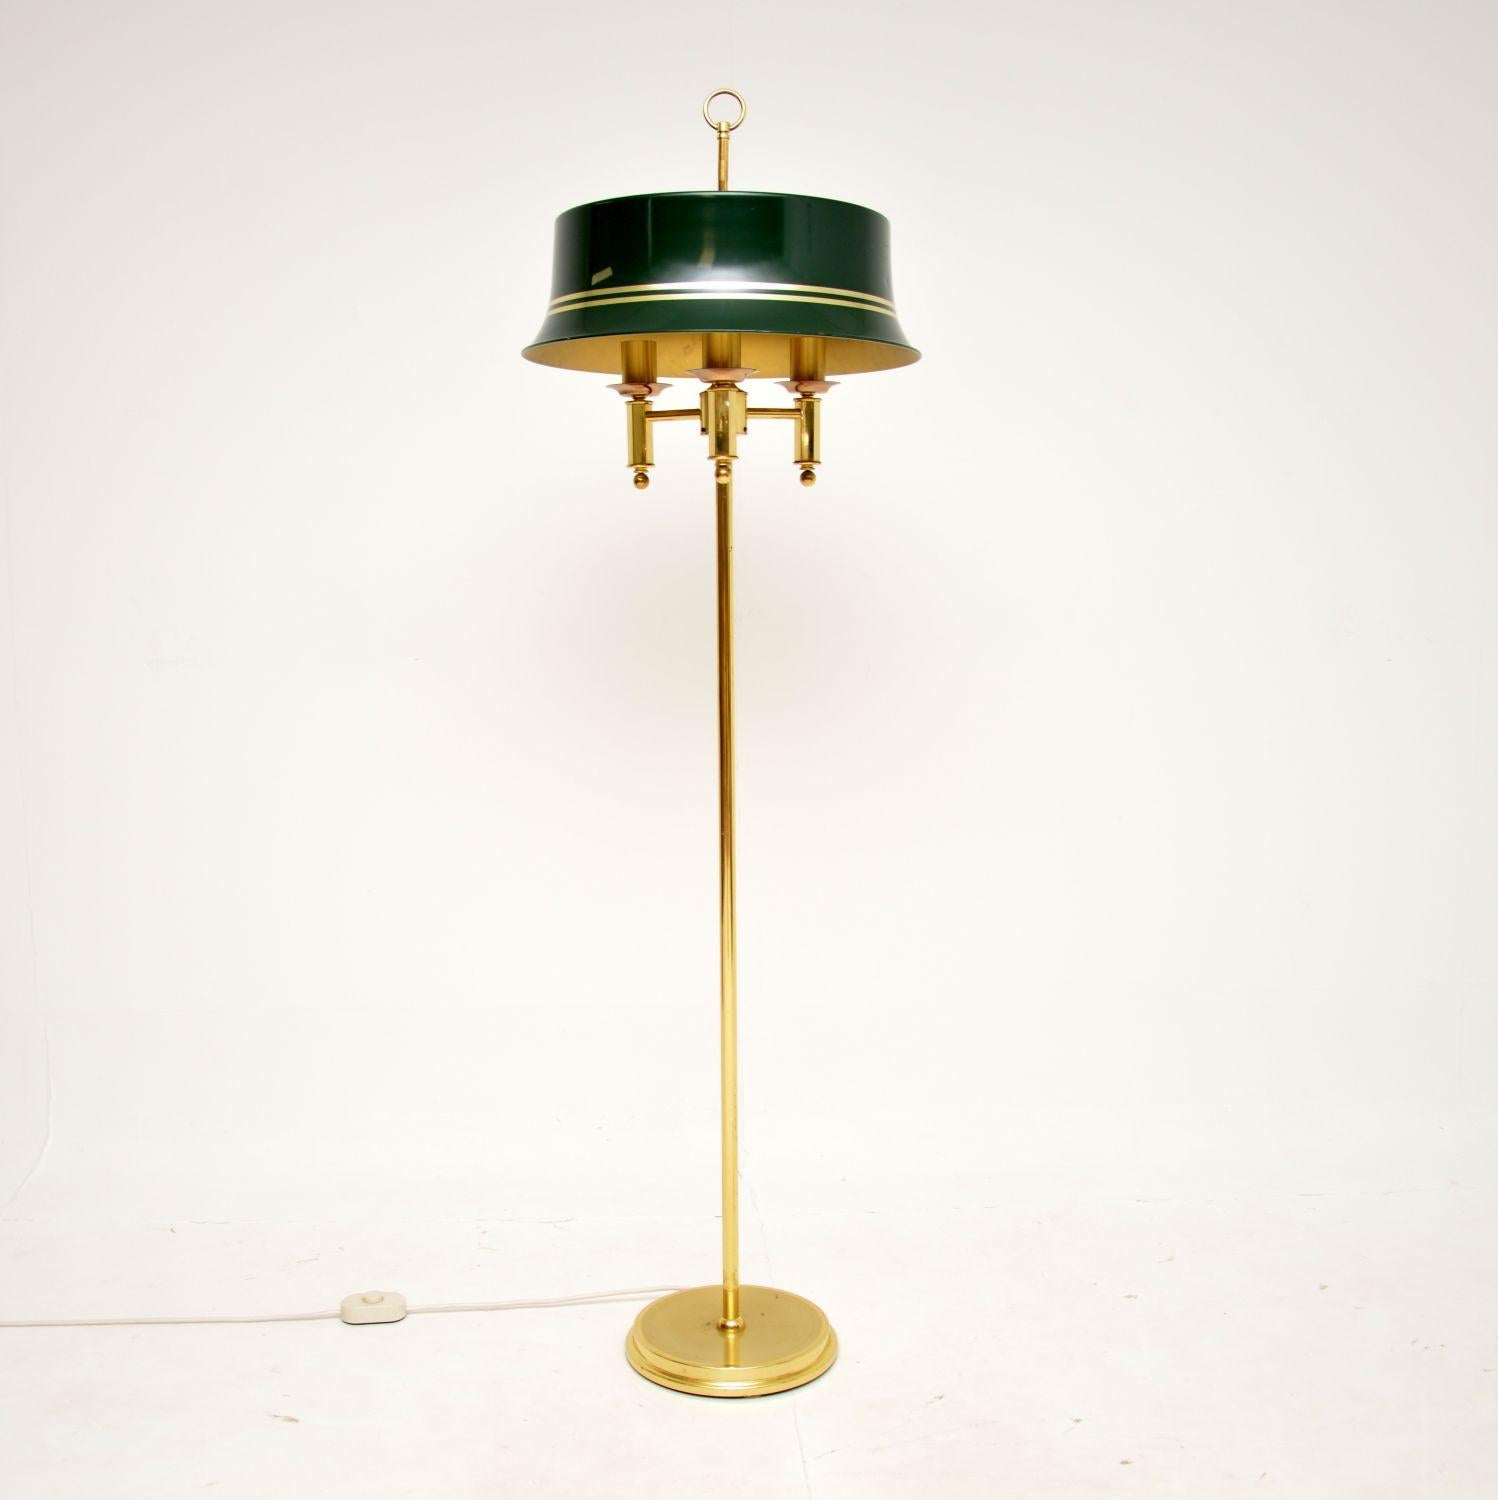 A superb vintage brass and tole floor lamp in the antique neoclassical style. This was made in England, it dates from around the 1970’s.

The quality is amazing, with a stunning green tole shade and solid brass construction throughout.

The